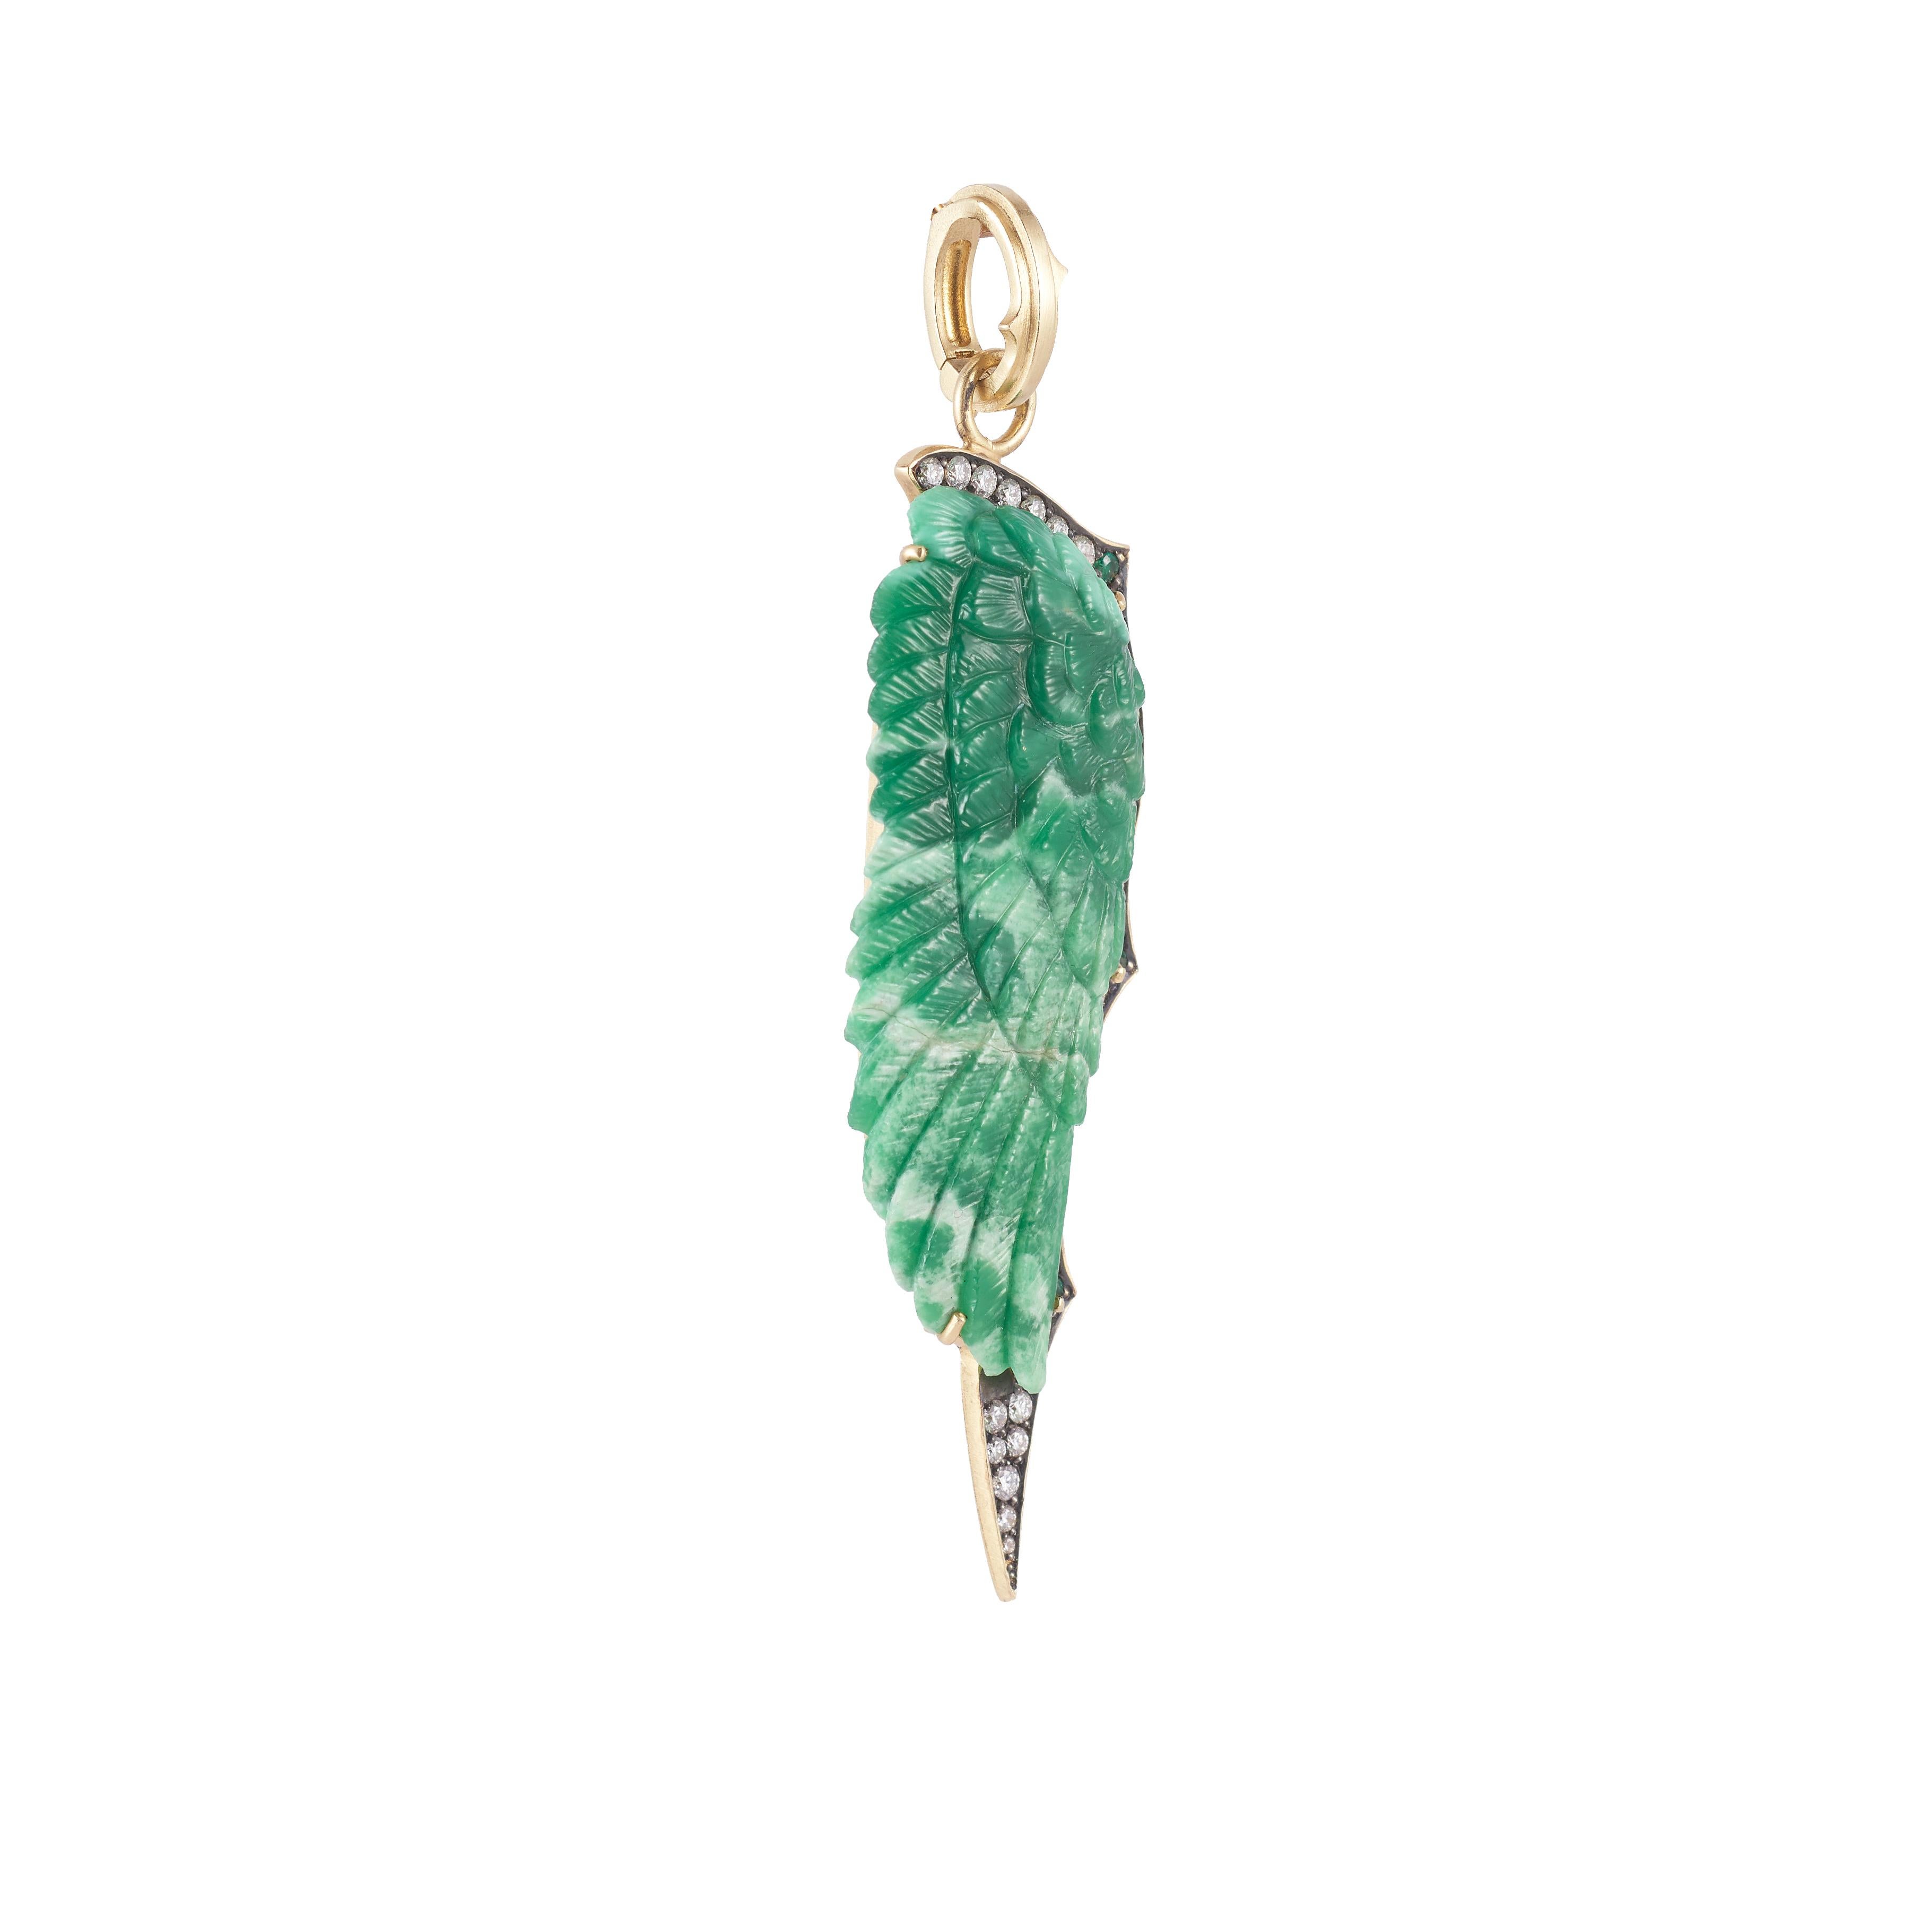 This vibrant green Variscite pendant has been hand-carved to each feather detail! Mounted in a handmade 18k yellow gold pendant with emerald and diamond halo and removable enhancer bale, this feather can be attached to a chain or worn with other